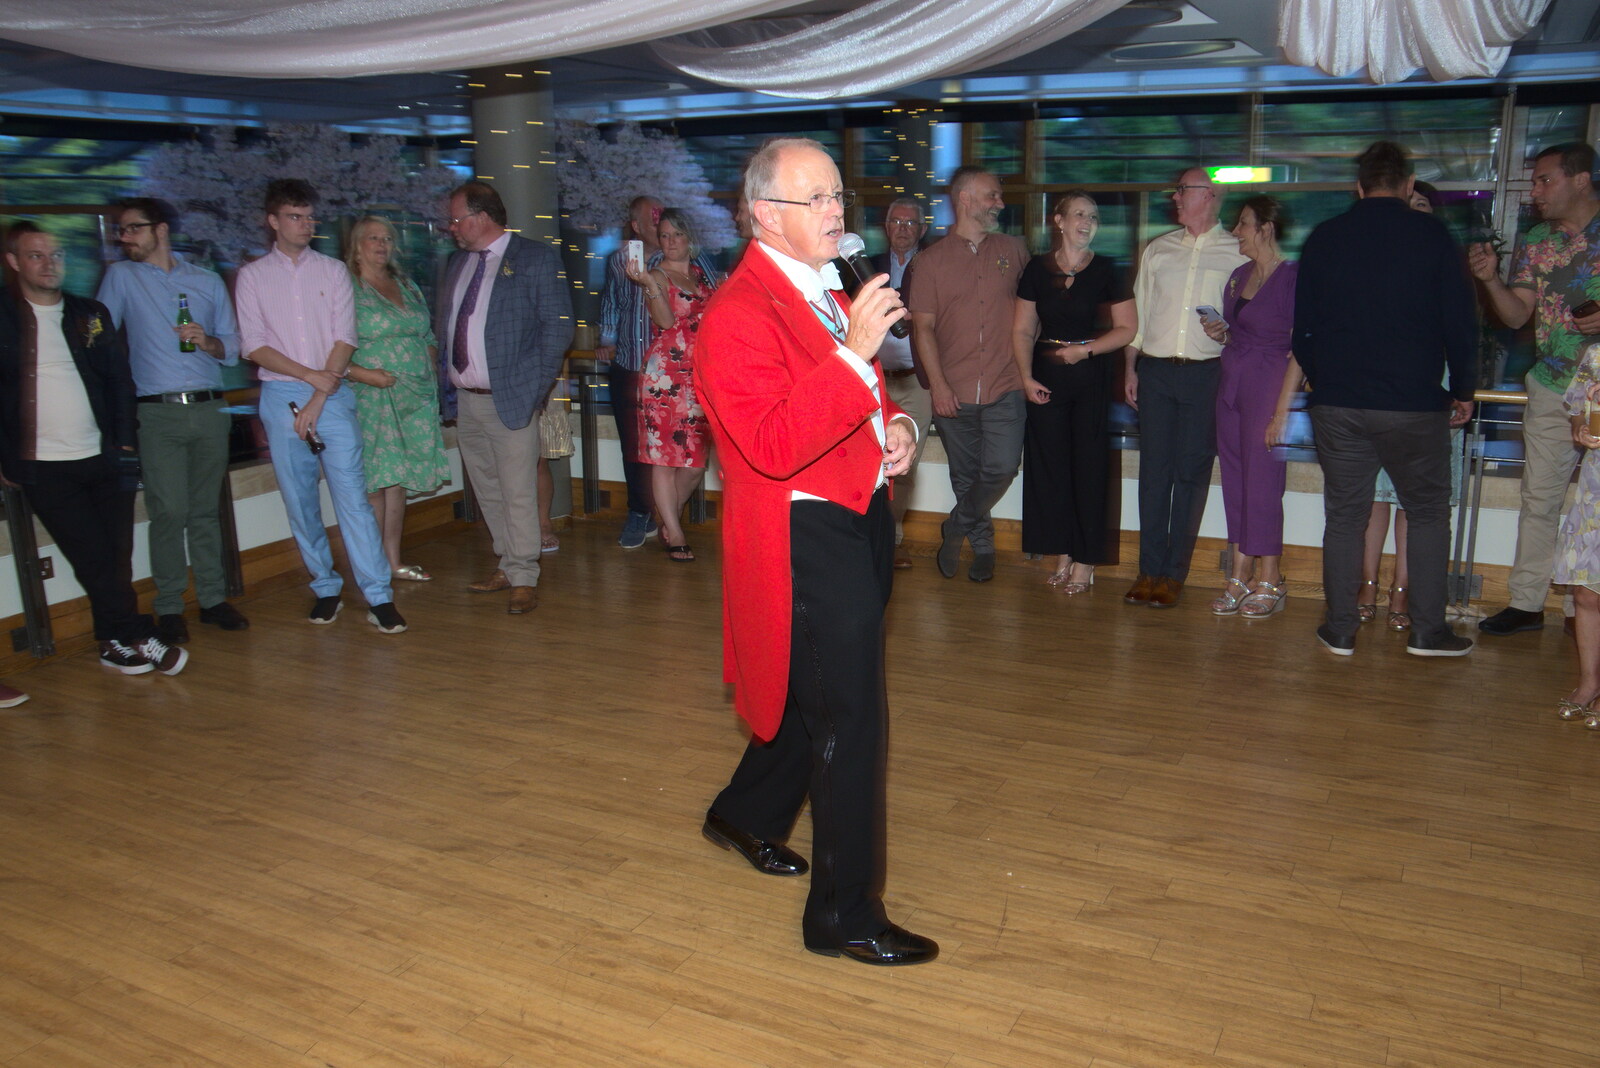 The master of ceremonies does his thing from Petay's Wedding Reception, Fanhams Hall, Ware, Hertfordshire - 20th August 2021